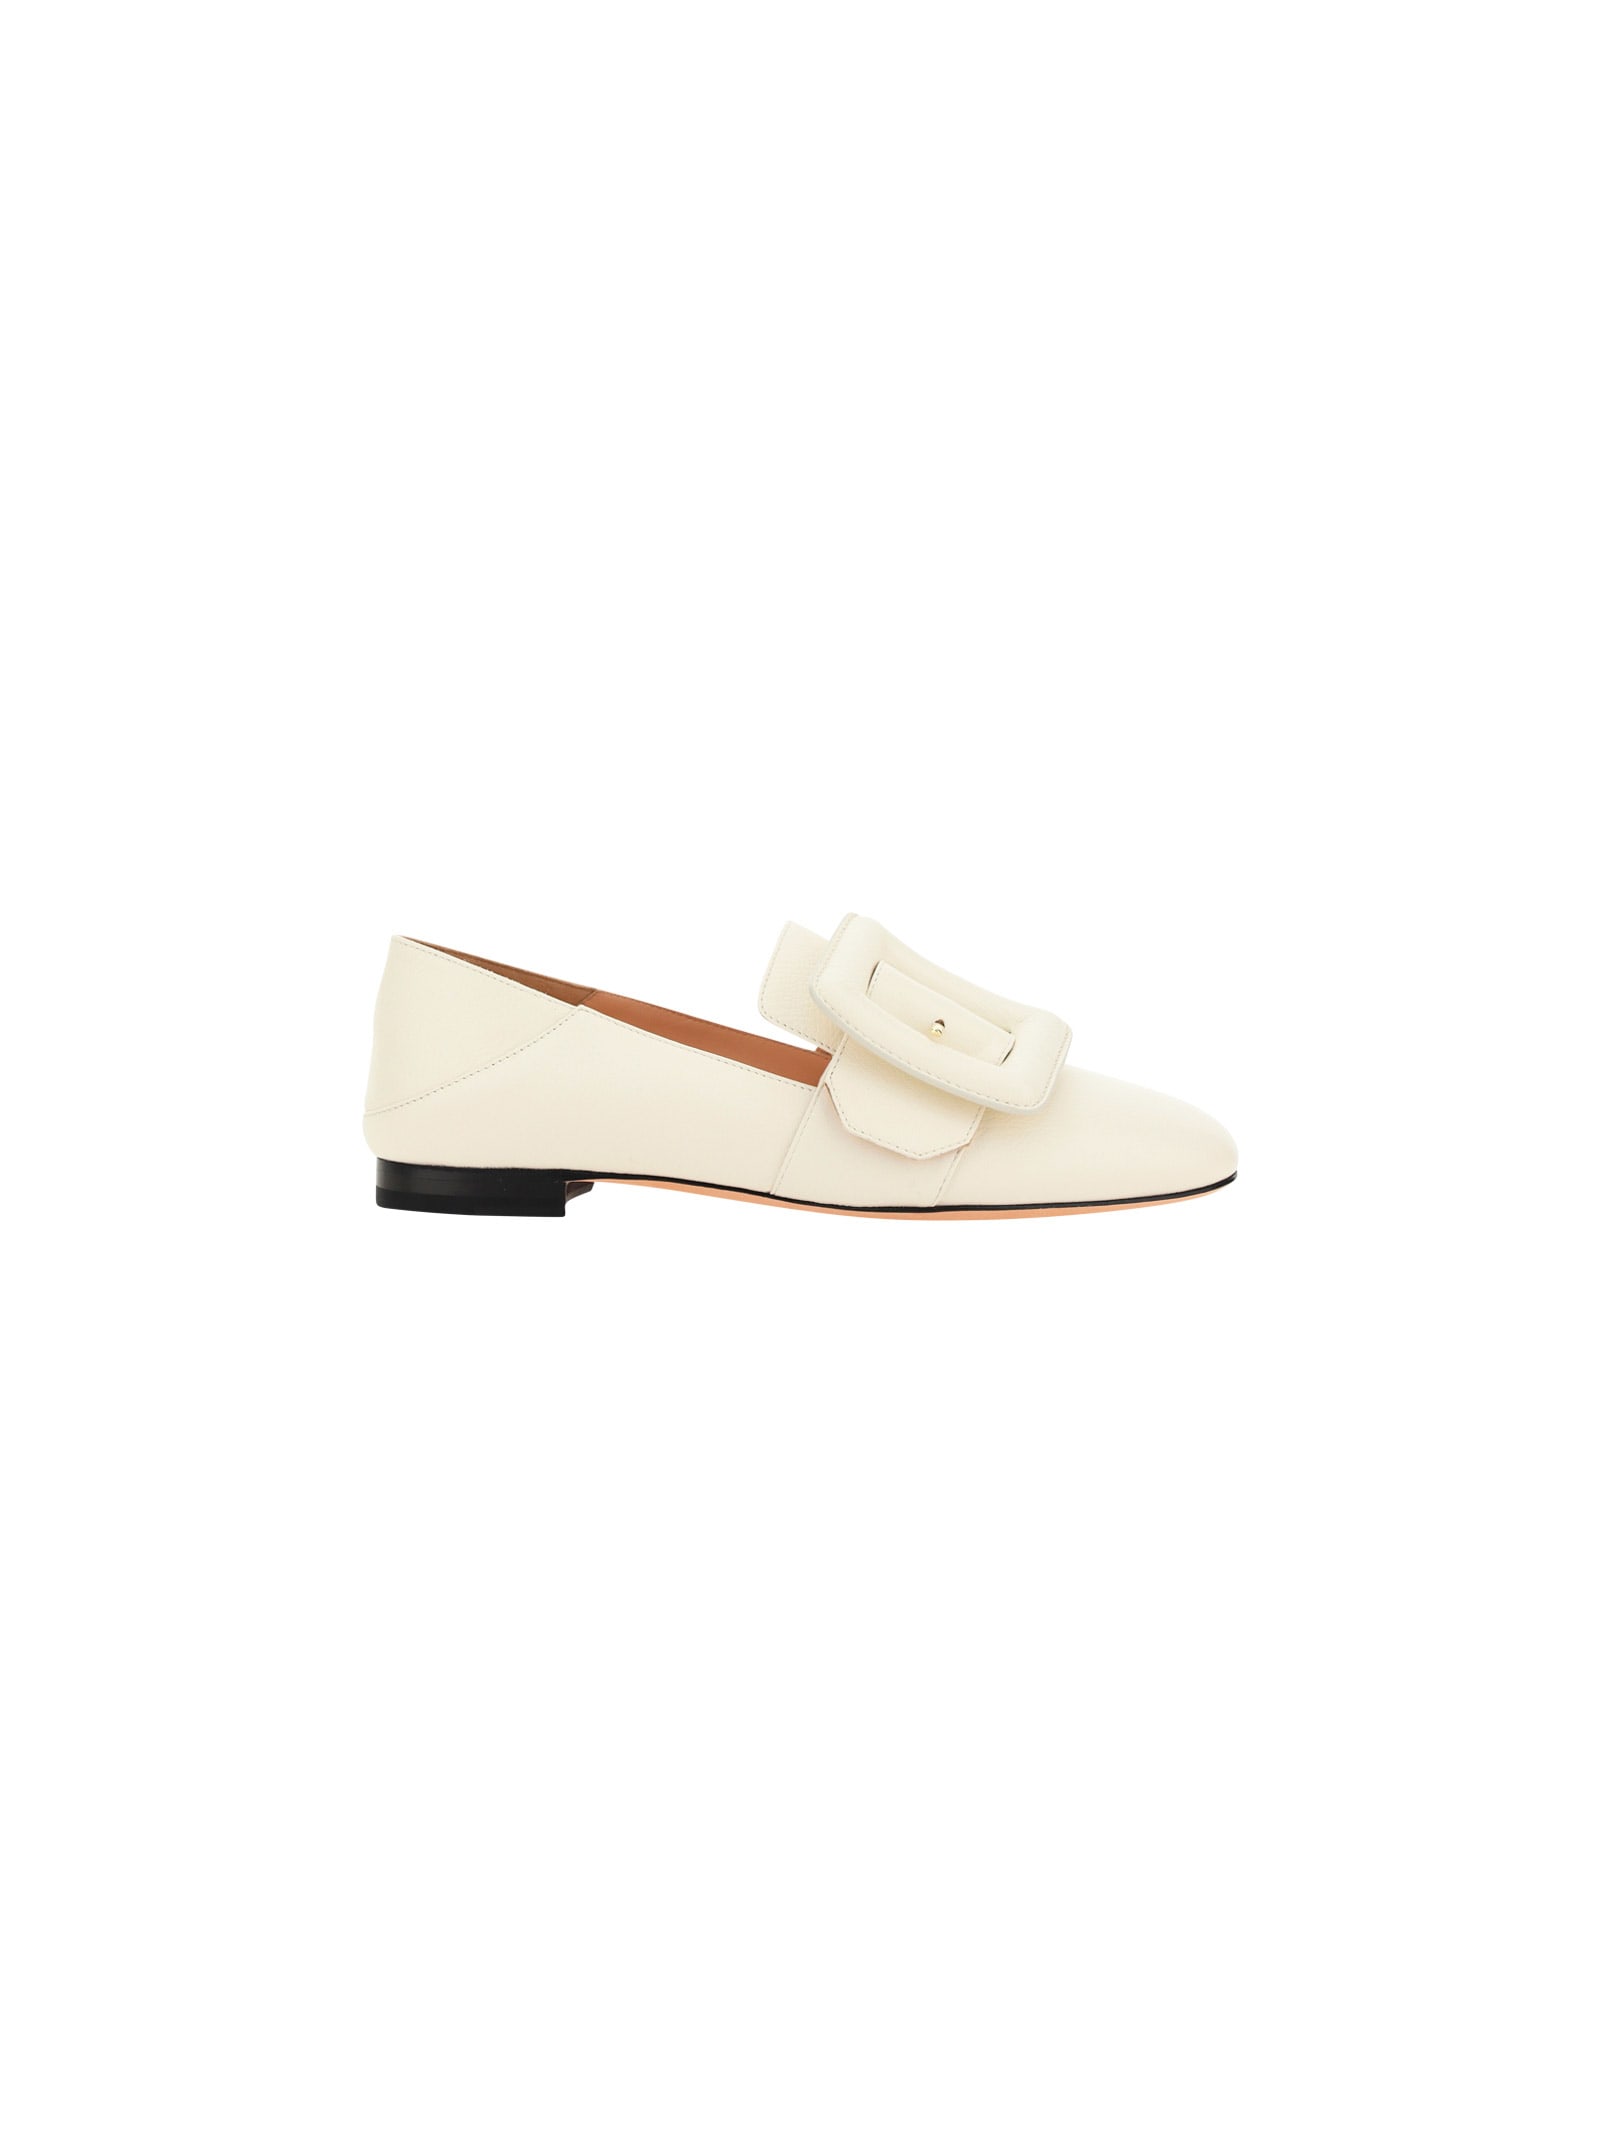 Bally Janelle Puffy Loafers